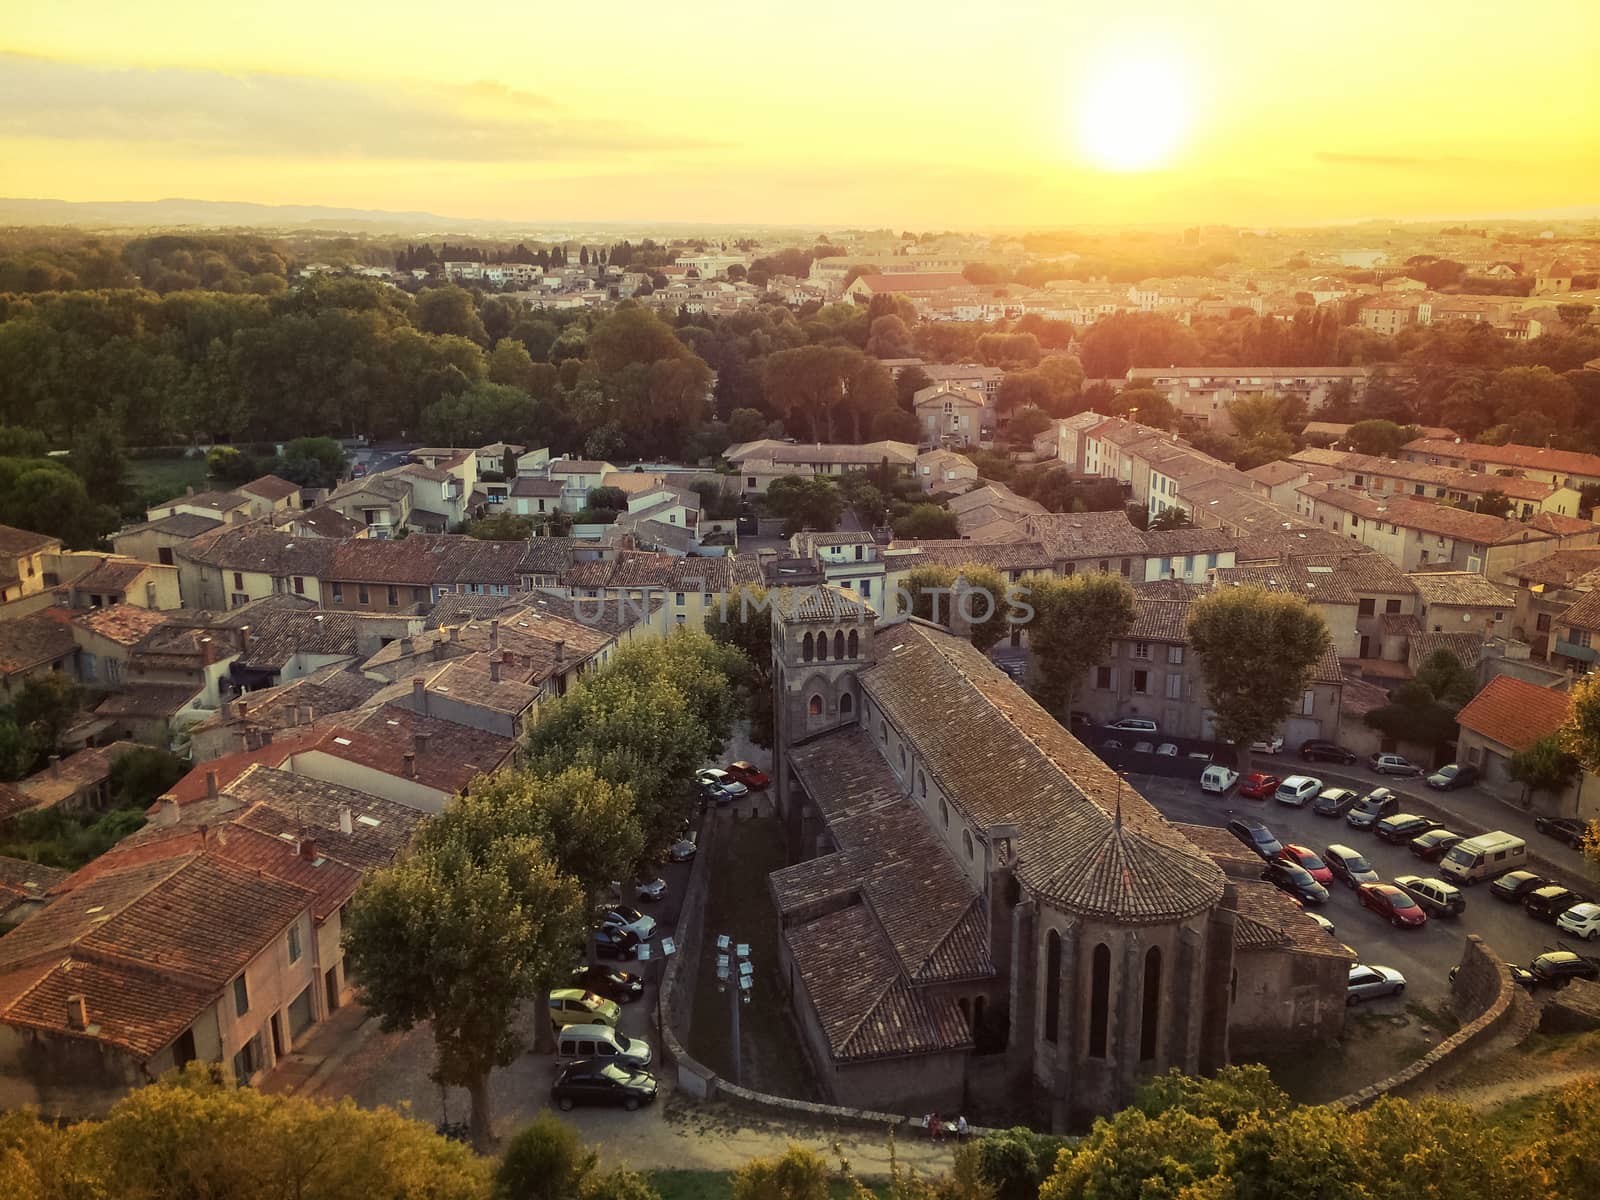 Sunset over the town of Carcassonne, France by anikasalsera